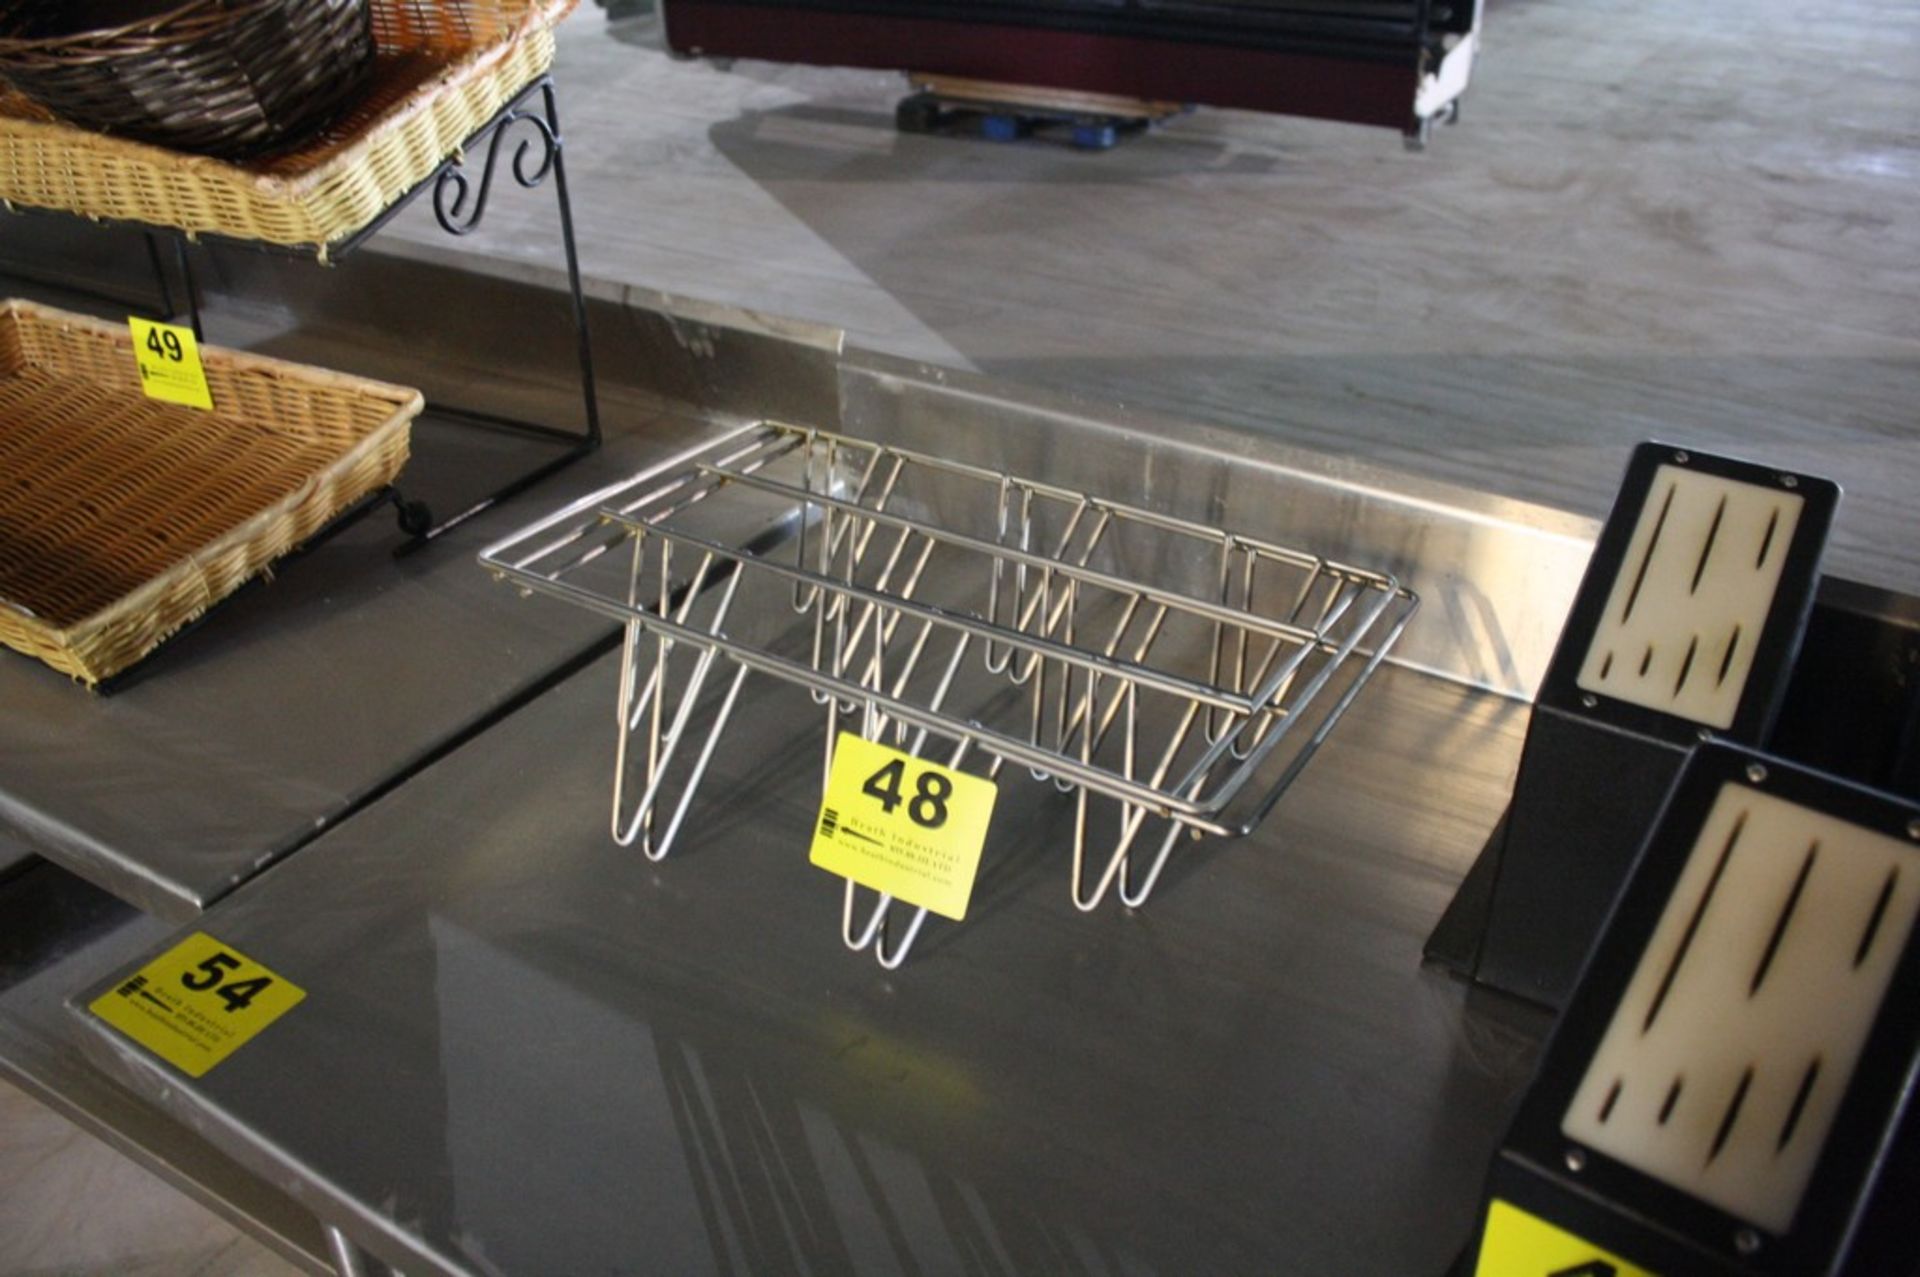 (2) STAINLESS STEEL SERVING STANDS